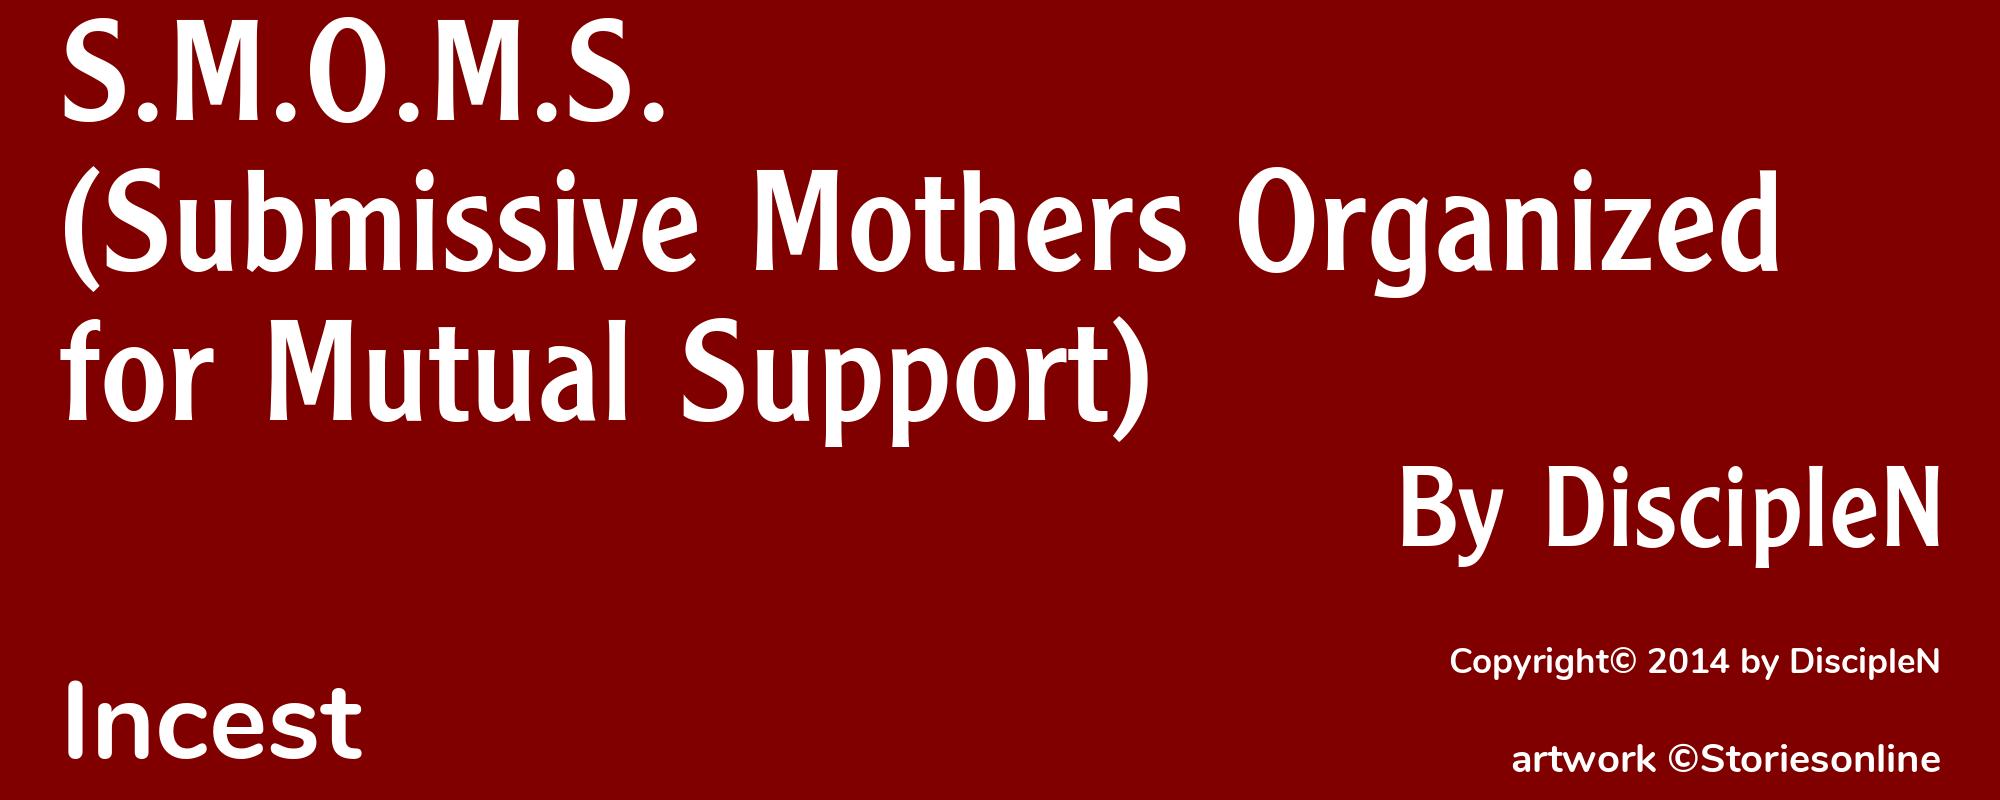 S.M.O.M.S. (Submissive Mothers Organized for Mutual Support) - Cover